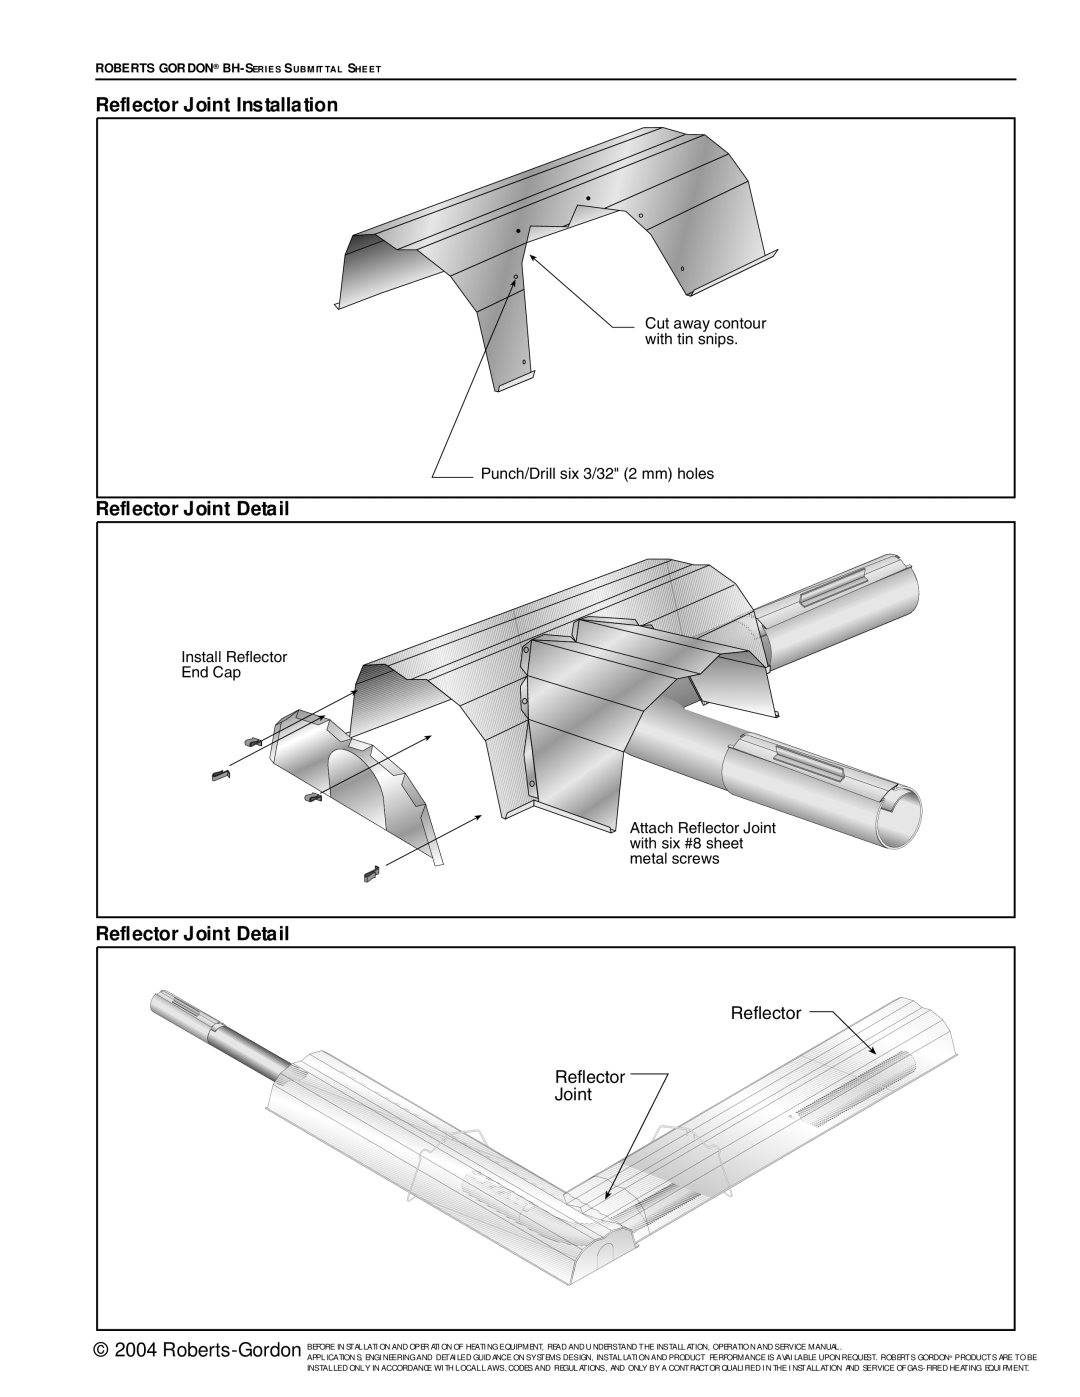 Roberts Gorden BH Series service manual Reflector Joint Installation, Reflector Joint Detail 